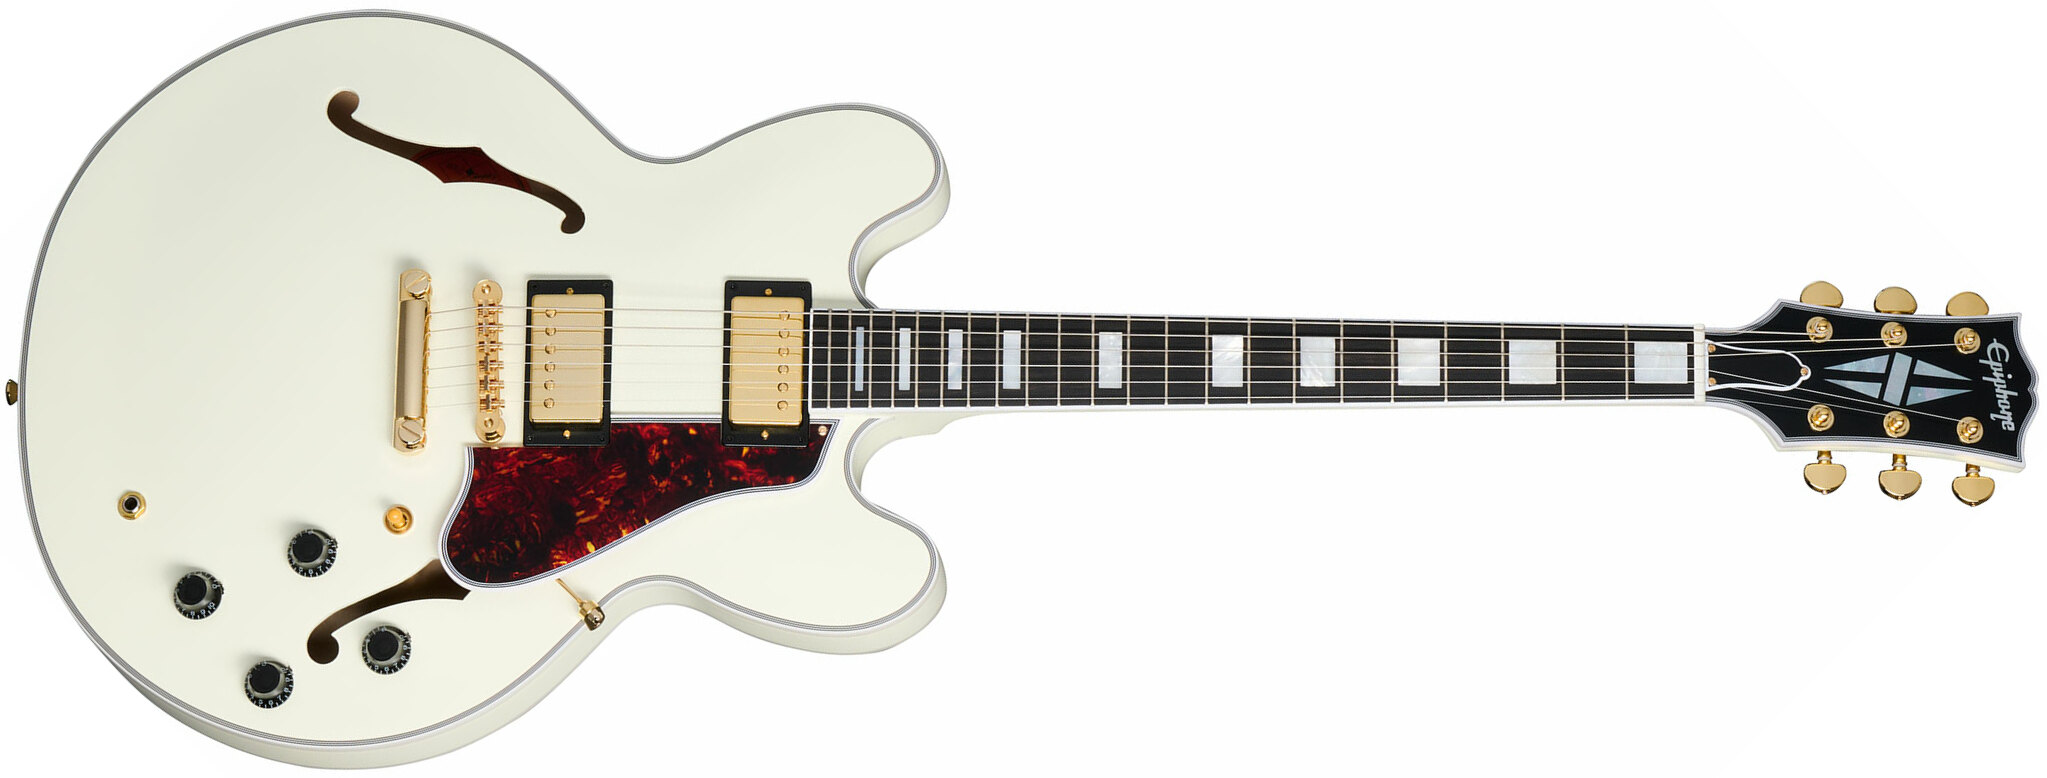 Epiphone Es355 1959 Inspired By 2h Gibson Ht Eb - Vos Classic White - Semi-Hollow E-Gitarre - Main picture